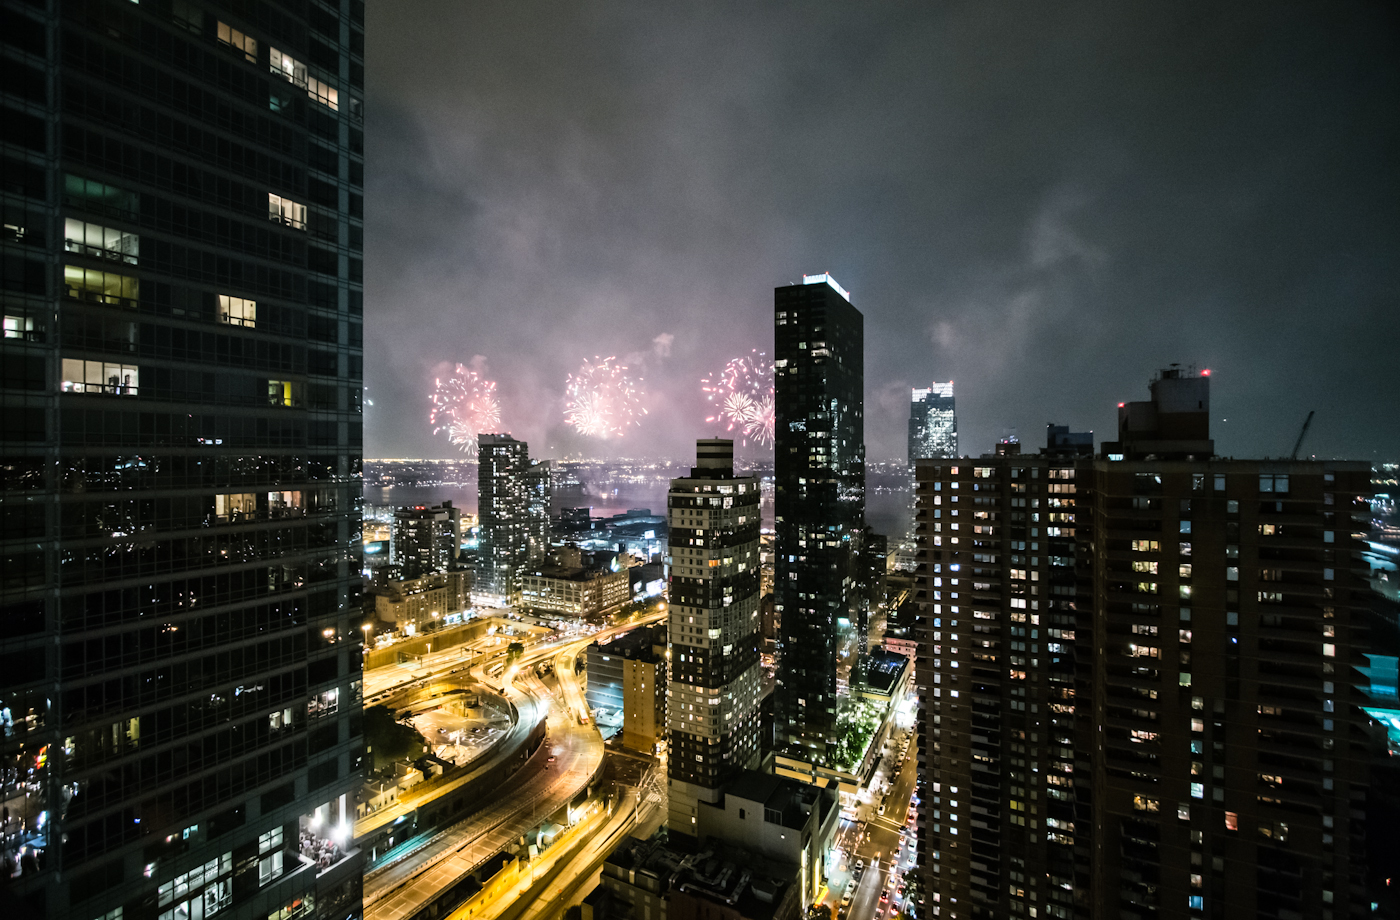 4th of July Fireworks in NYC